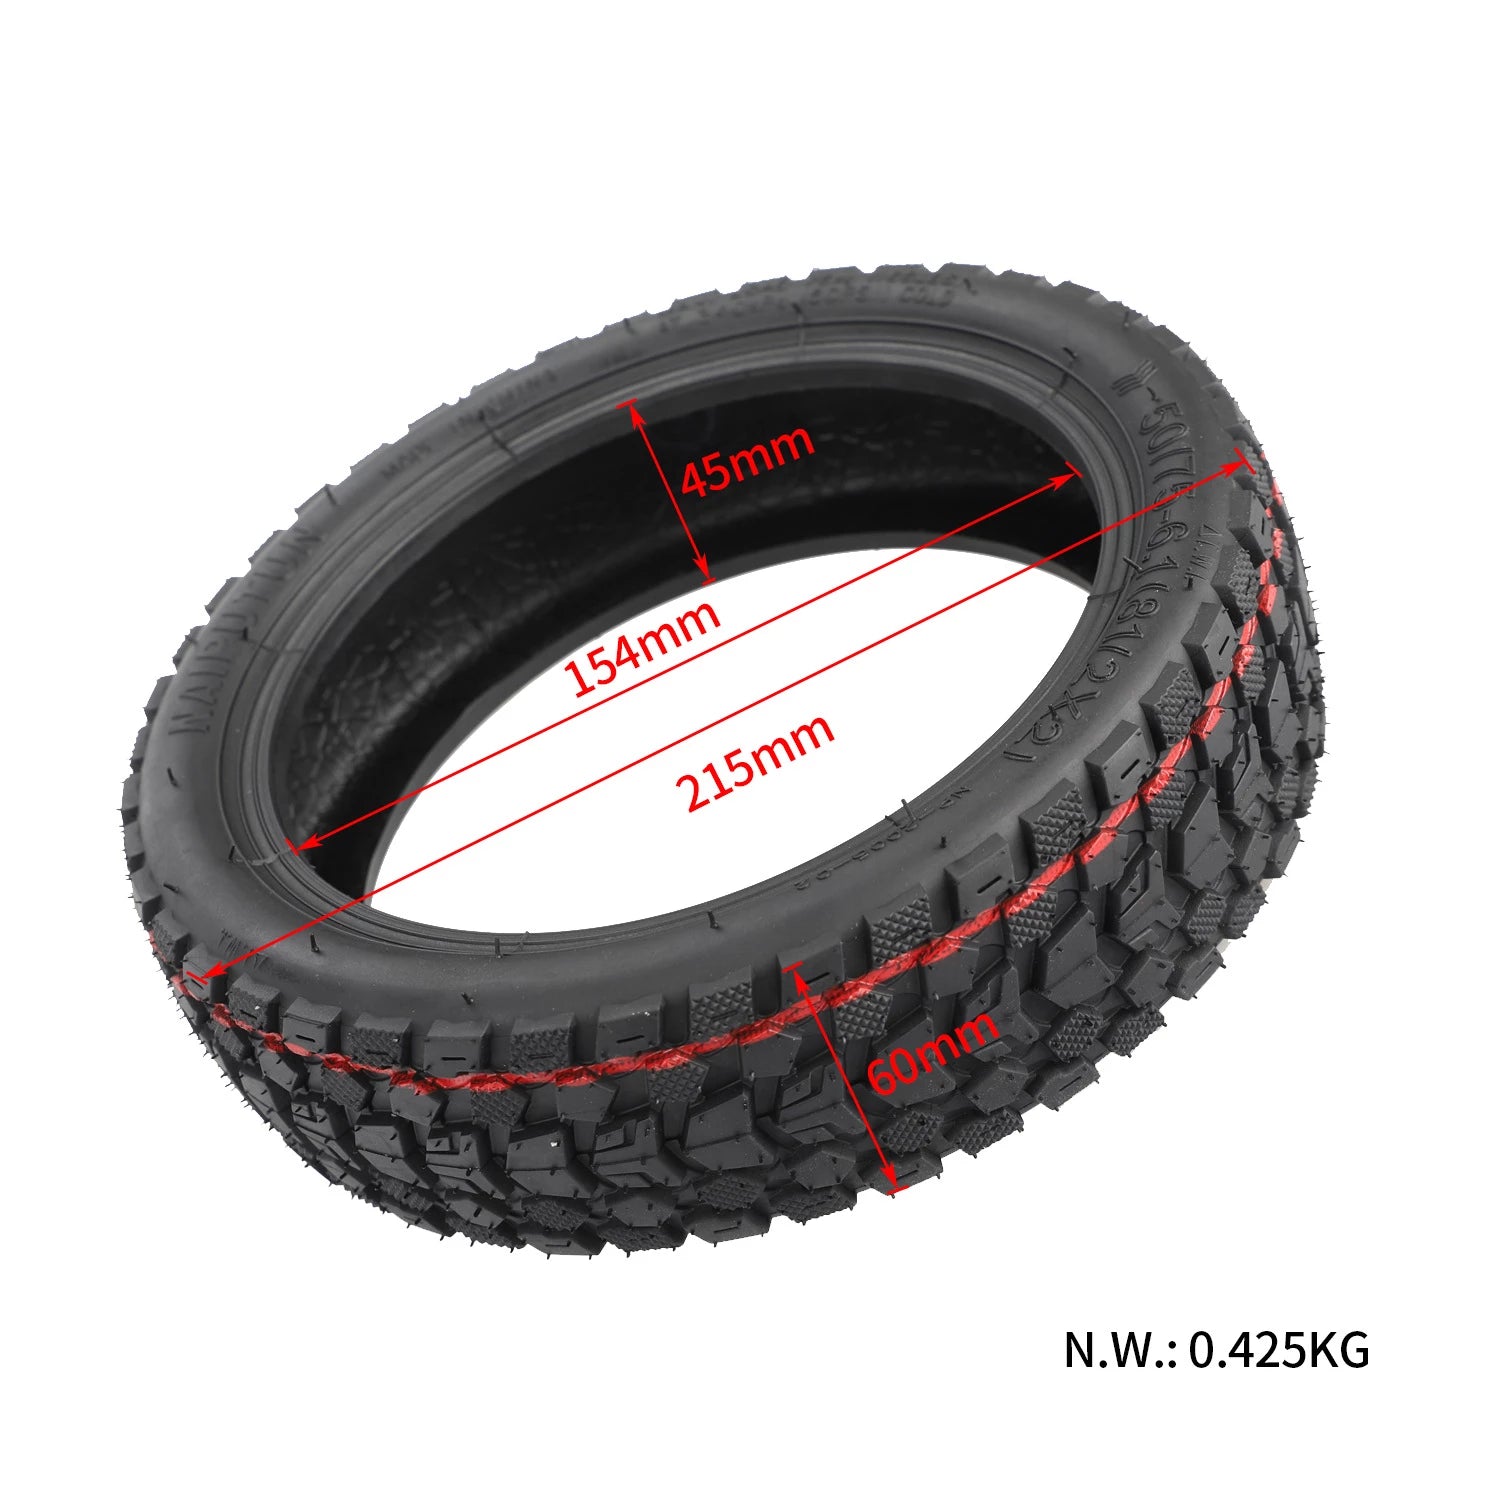 XIAOMI M365 / PRO Electric Scooter Off-Road Tyre-Electric Scooters London